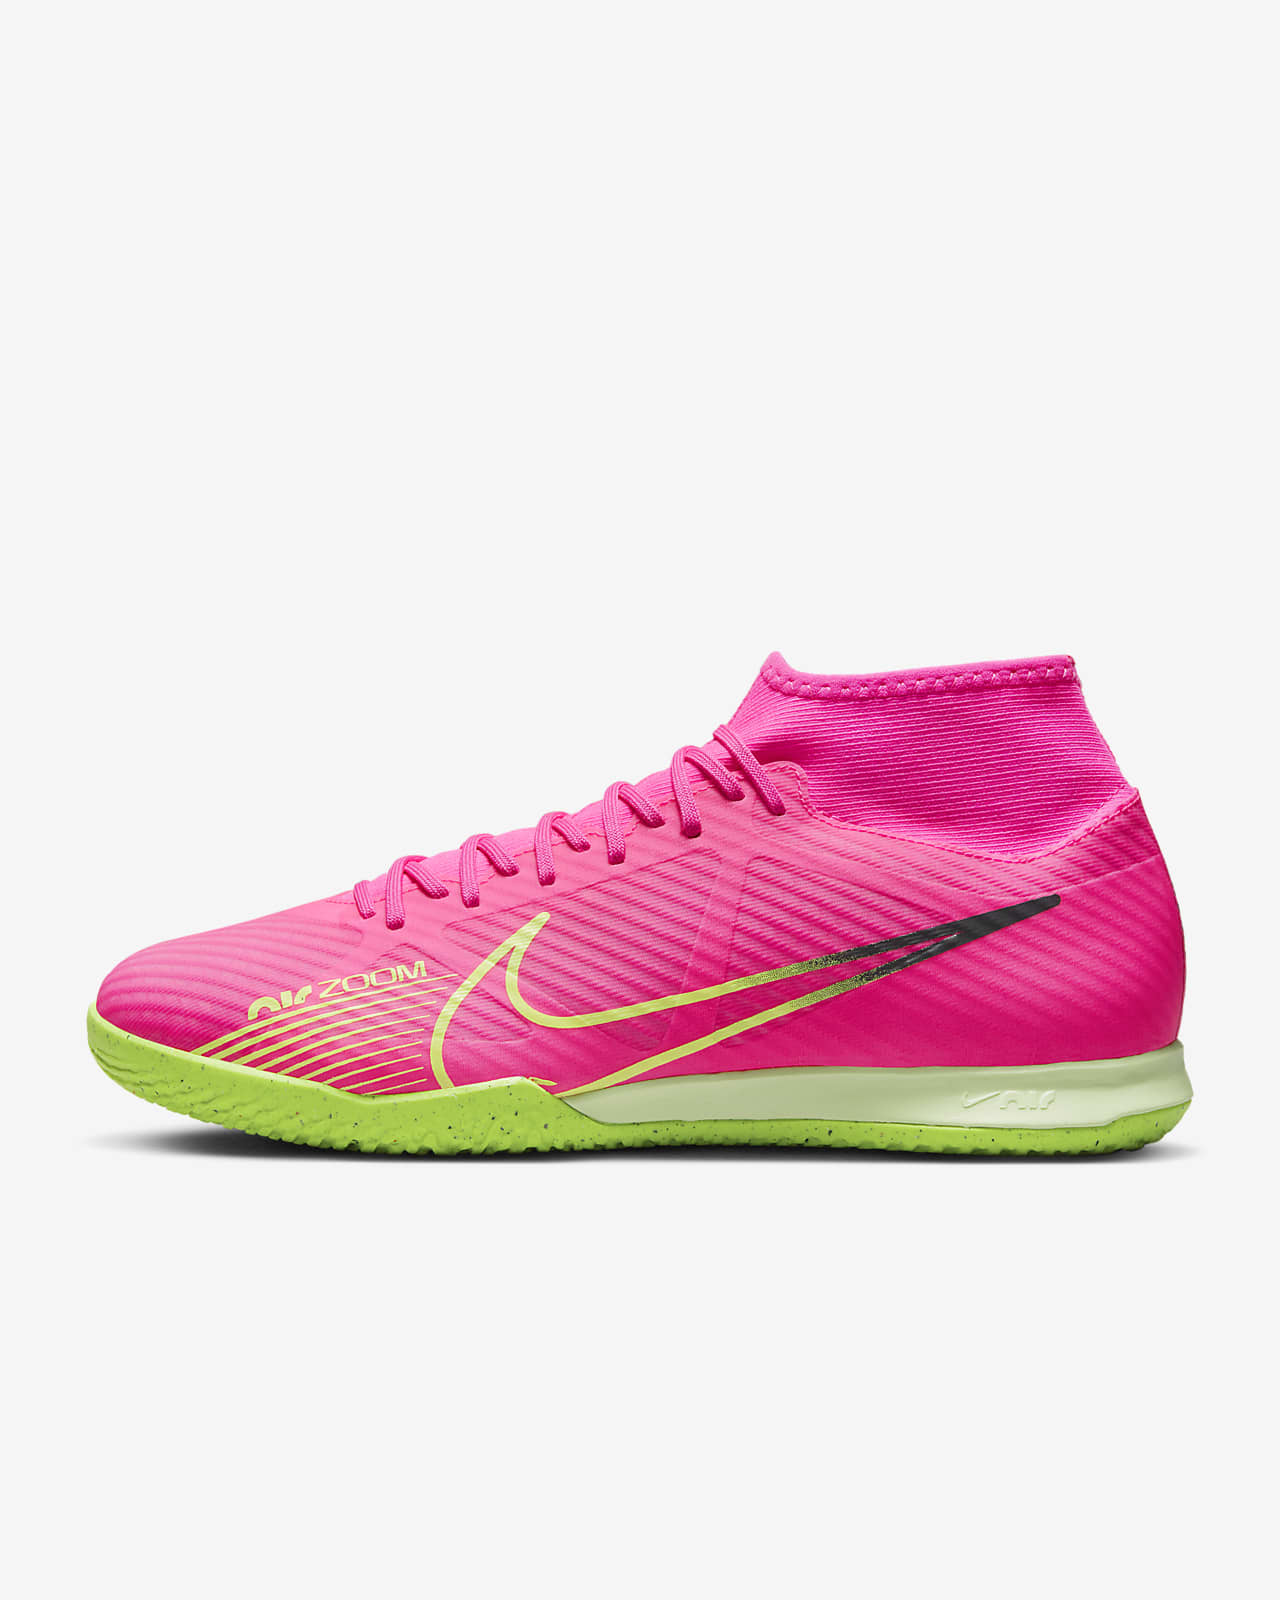 Nike Superfly 9 Academy Soccer Shoes.